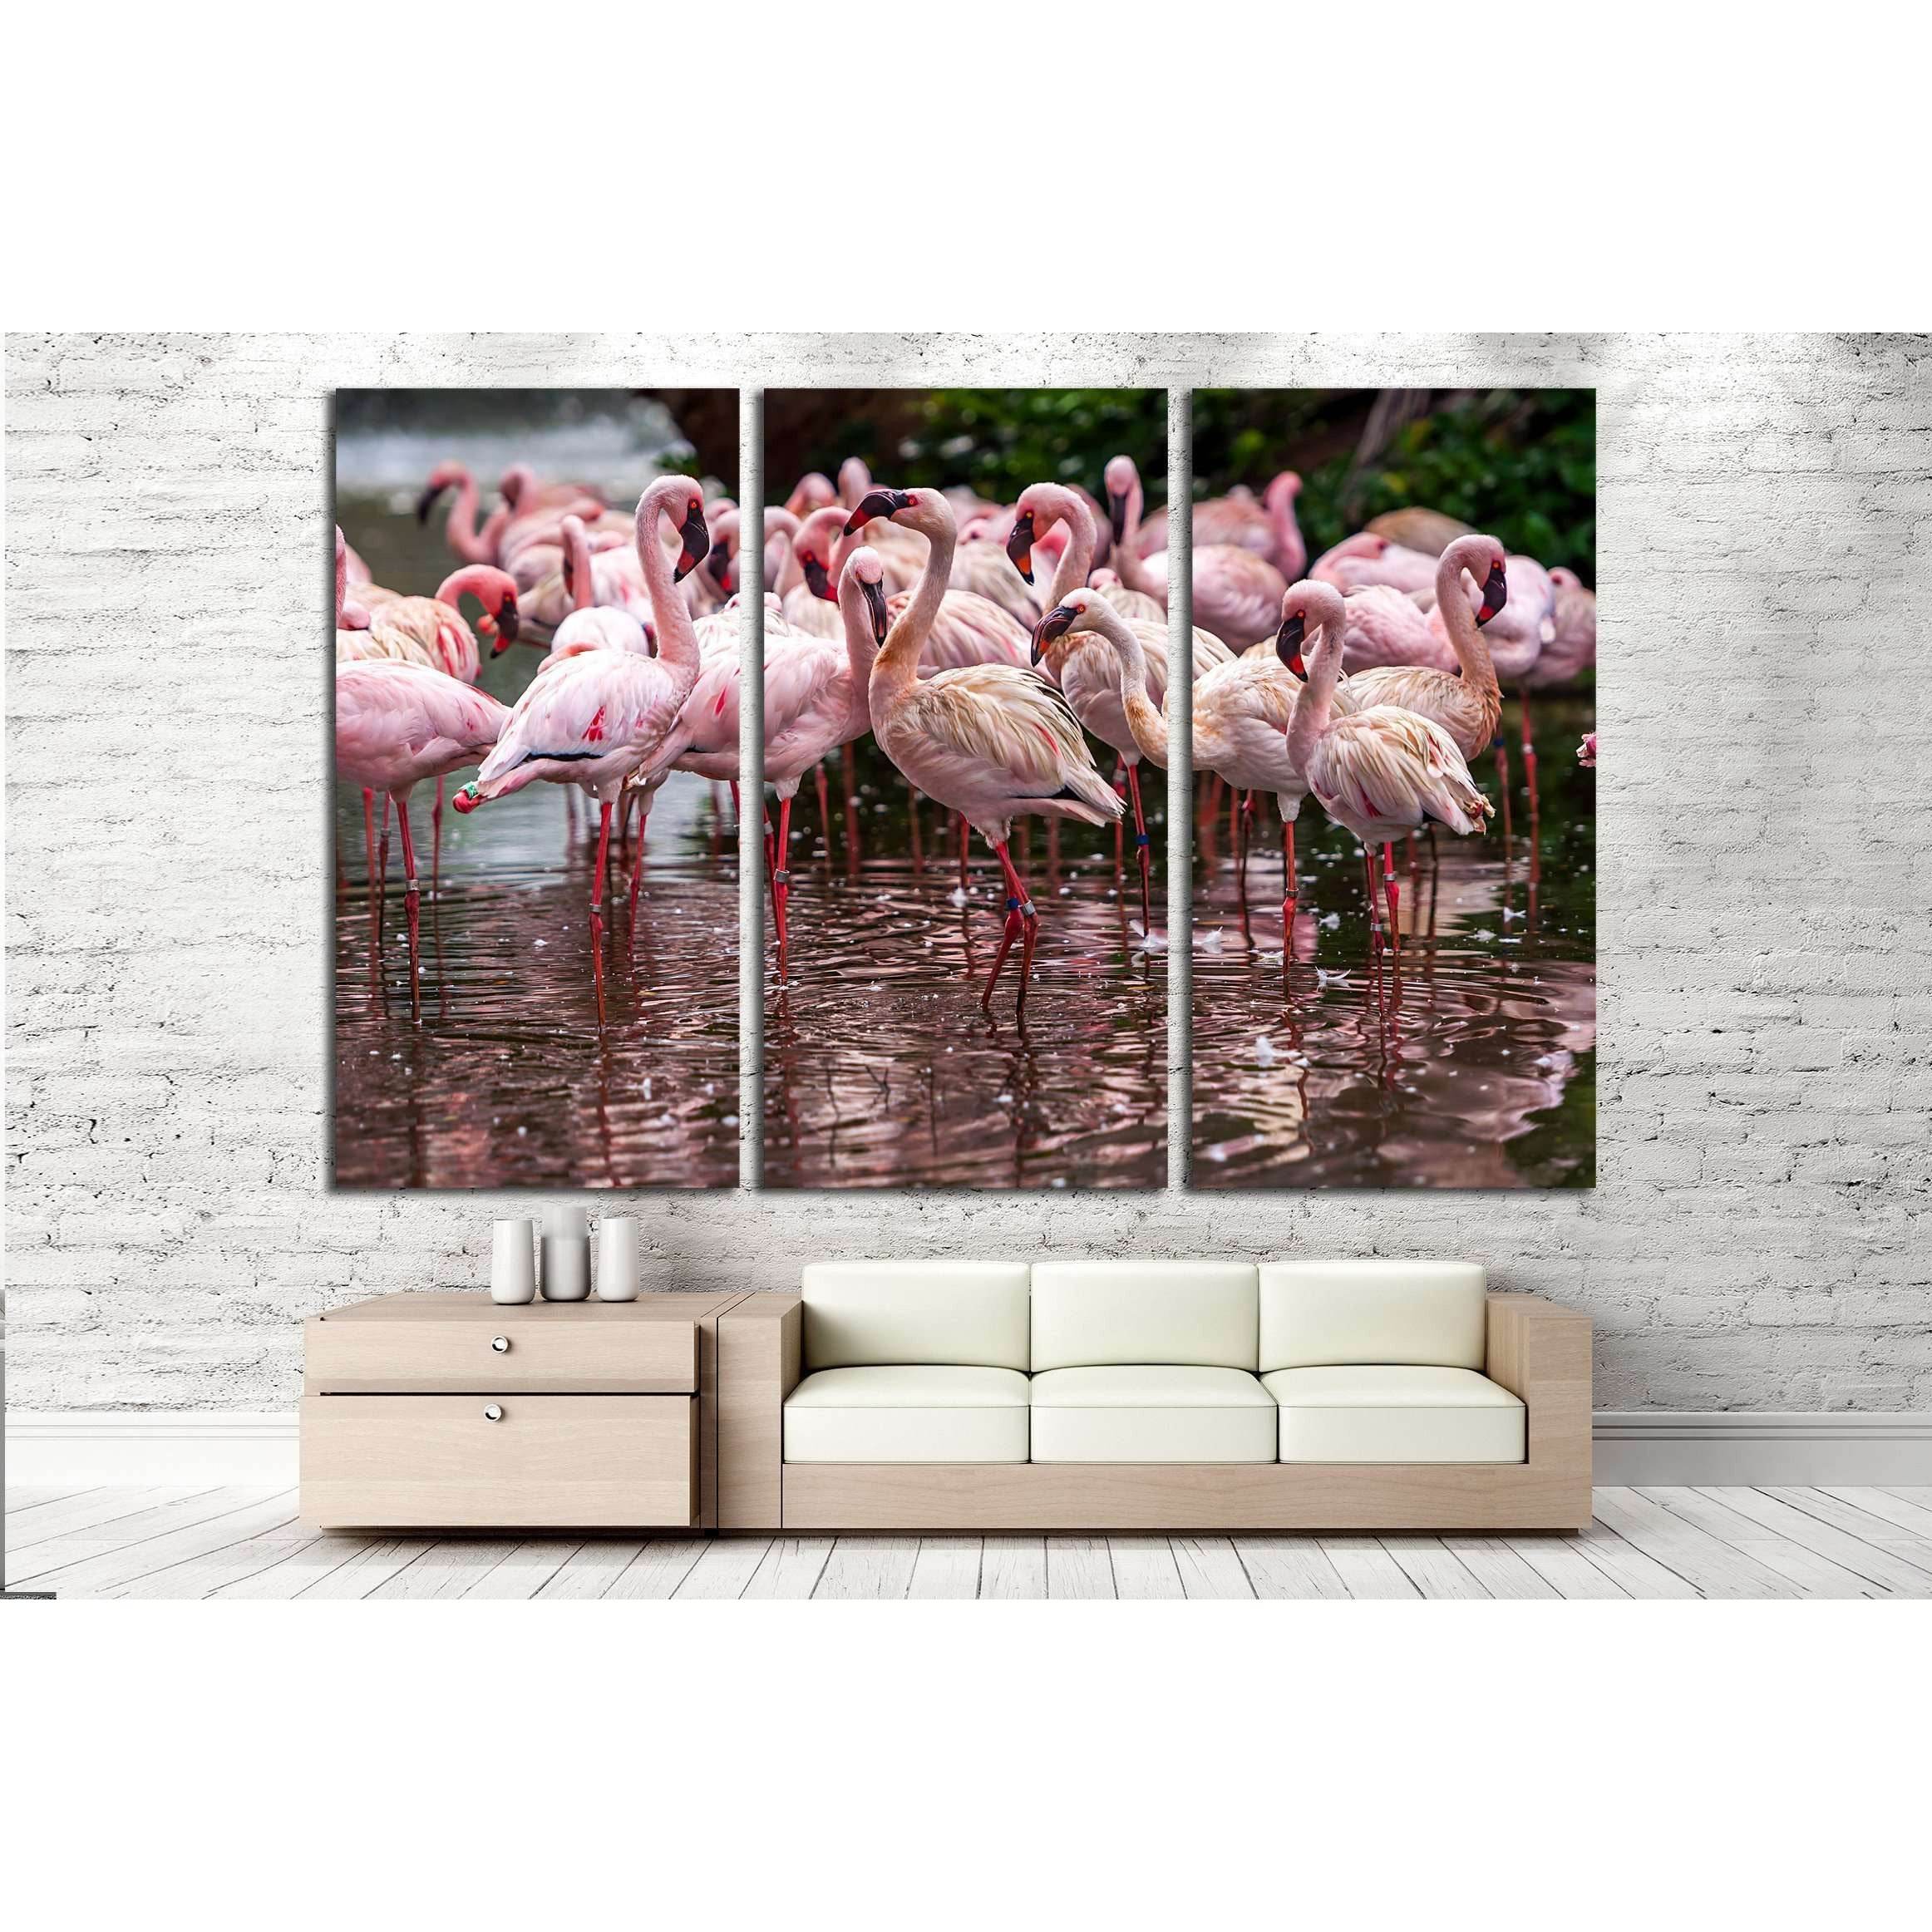 A flock of pink flamingos and reflection in the water №2795 Ready to Hang Canvas Print